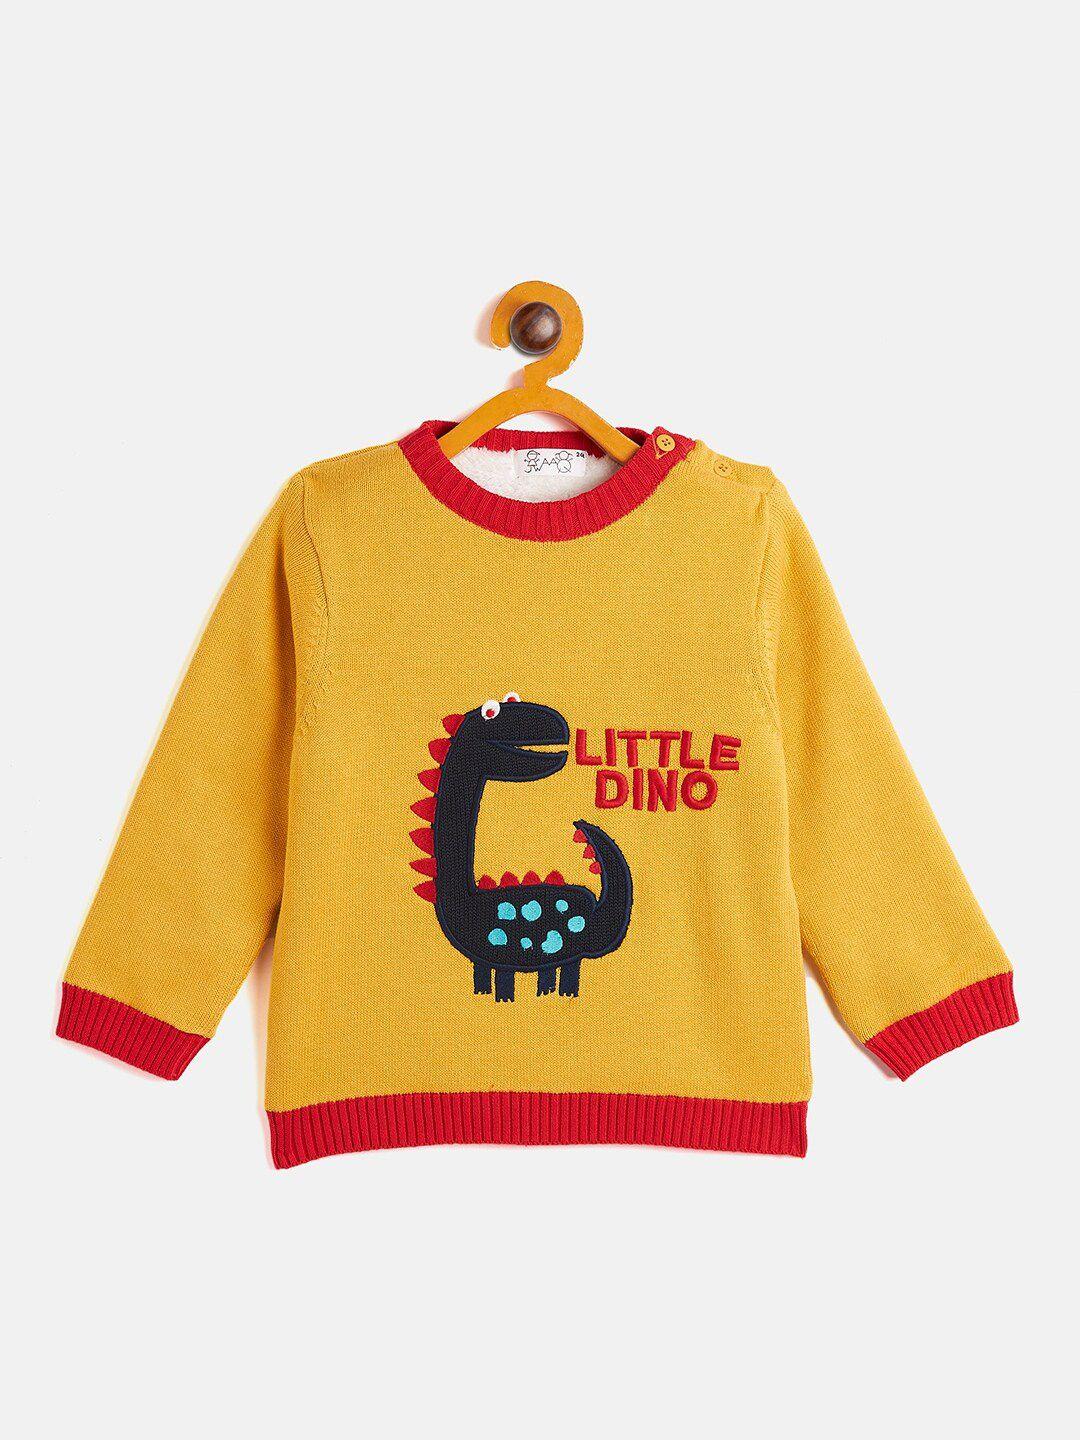 jwaaq unisex kids yellow & red printed pullover